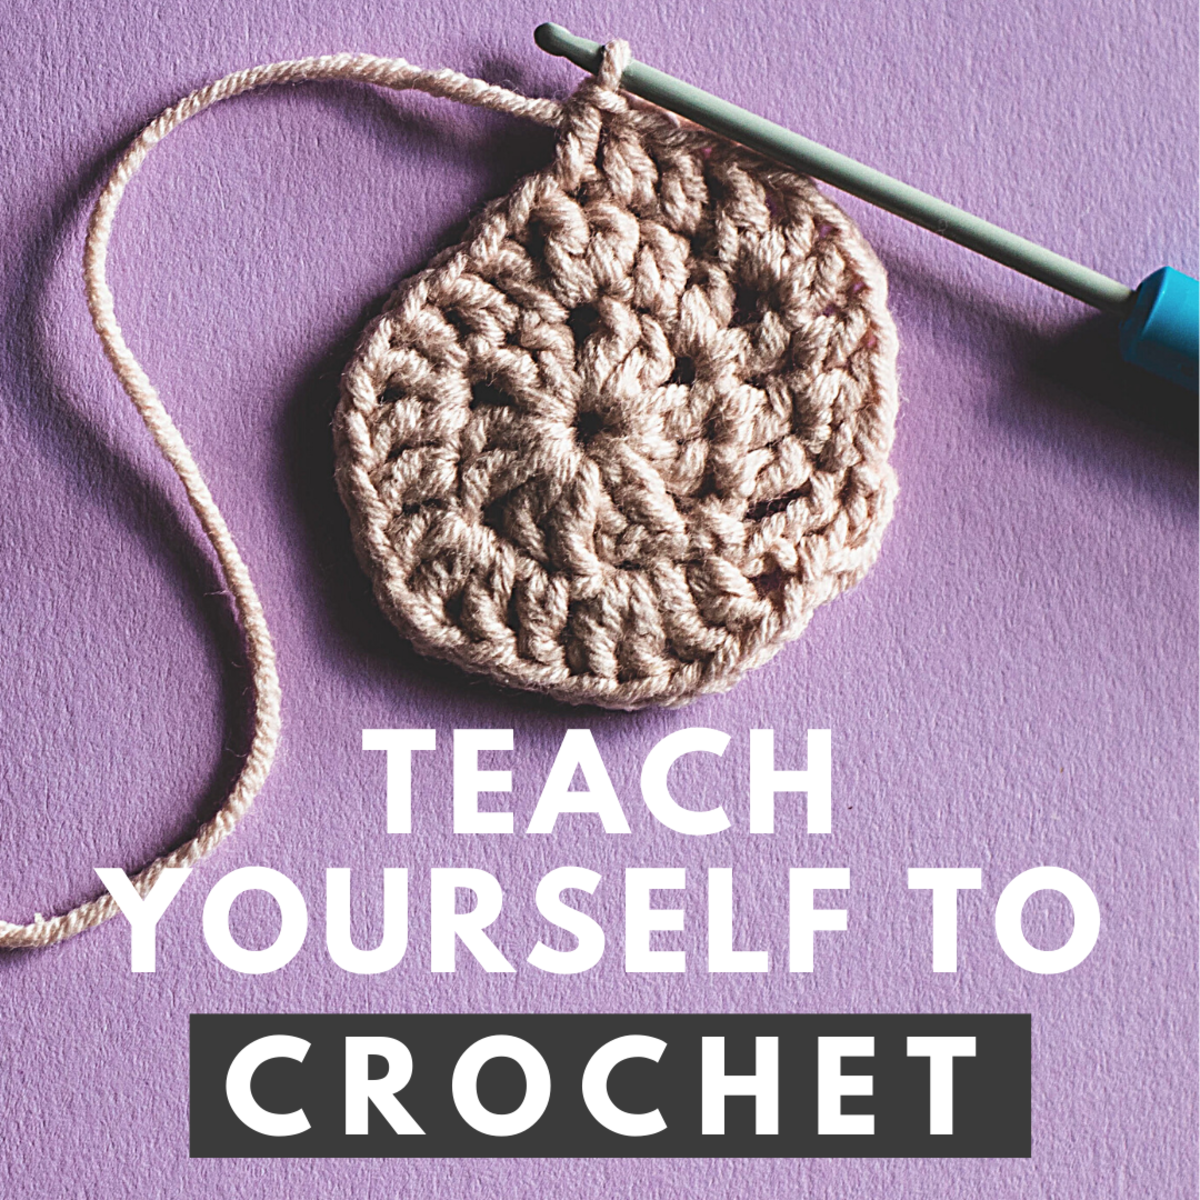 How to Crochet: A Beginner's Guide With Photos and Videos